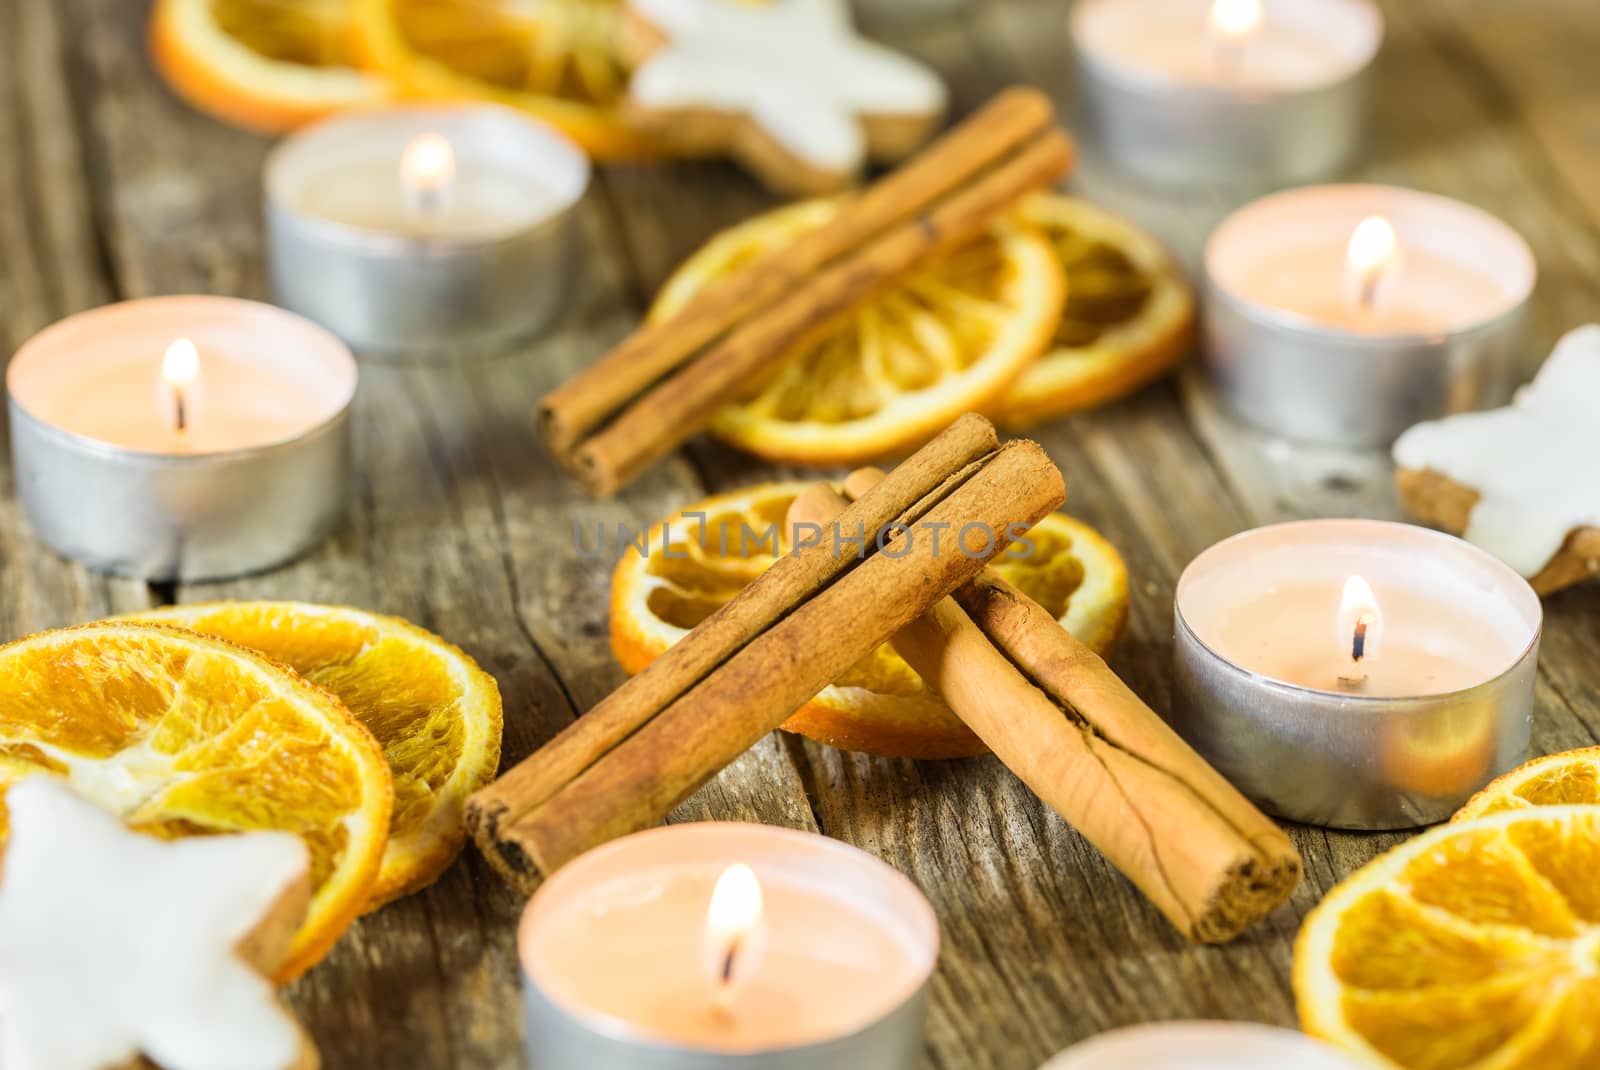 Advent and Christmas season composition with candle flames, orange slices, cinnamon and star shape cookies